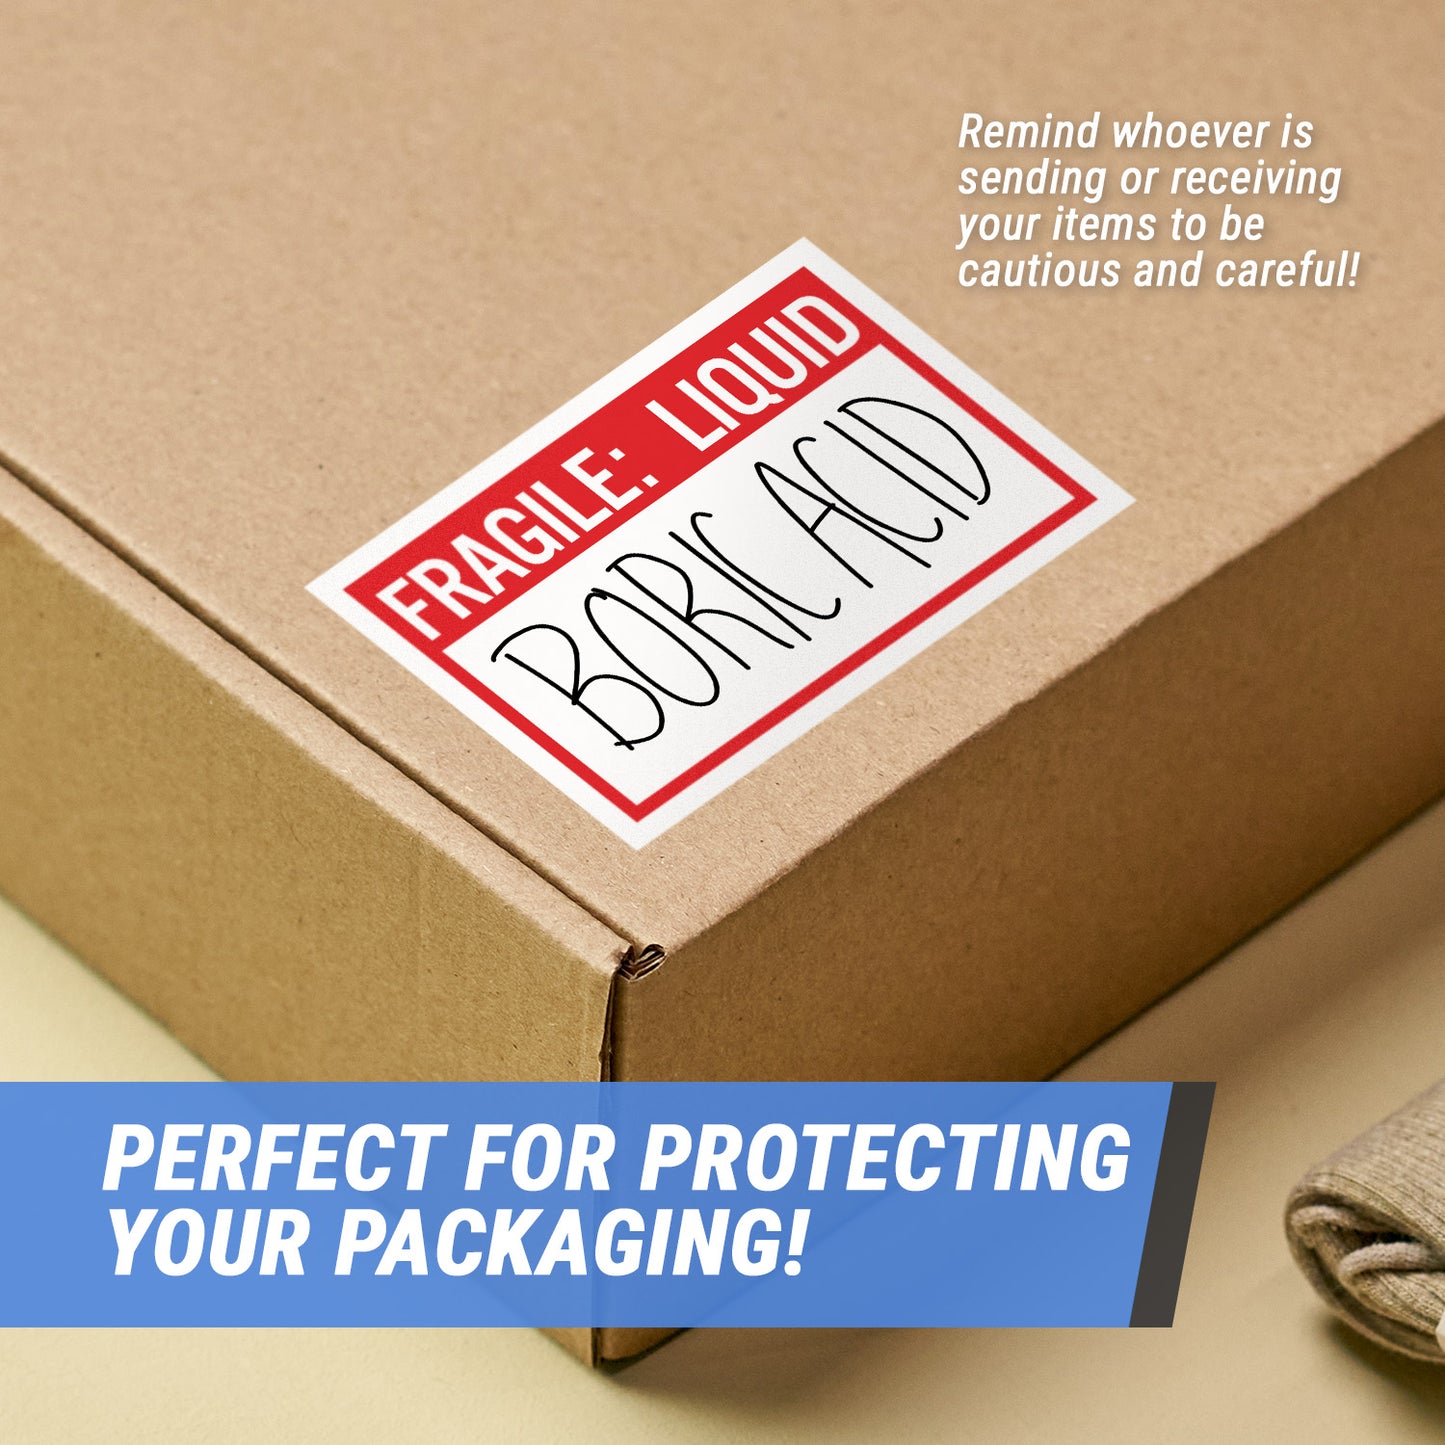 3 x 2 inch | Shipping & Handling: Fragile Stickers - Fragile: Liquid Stickers